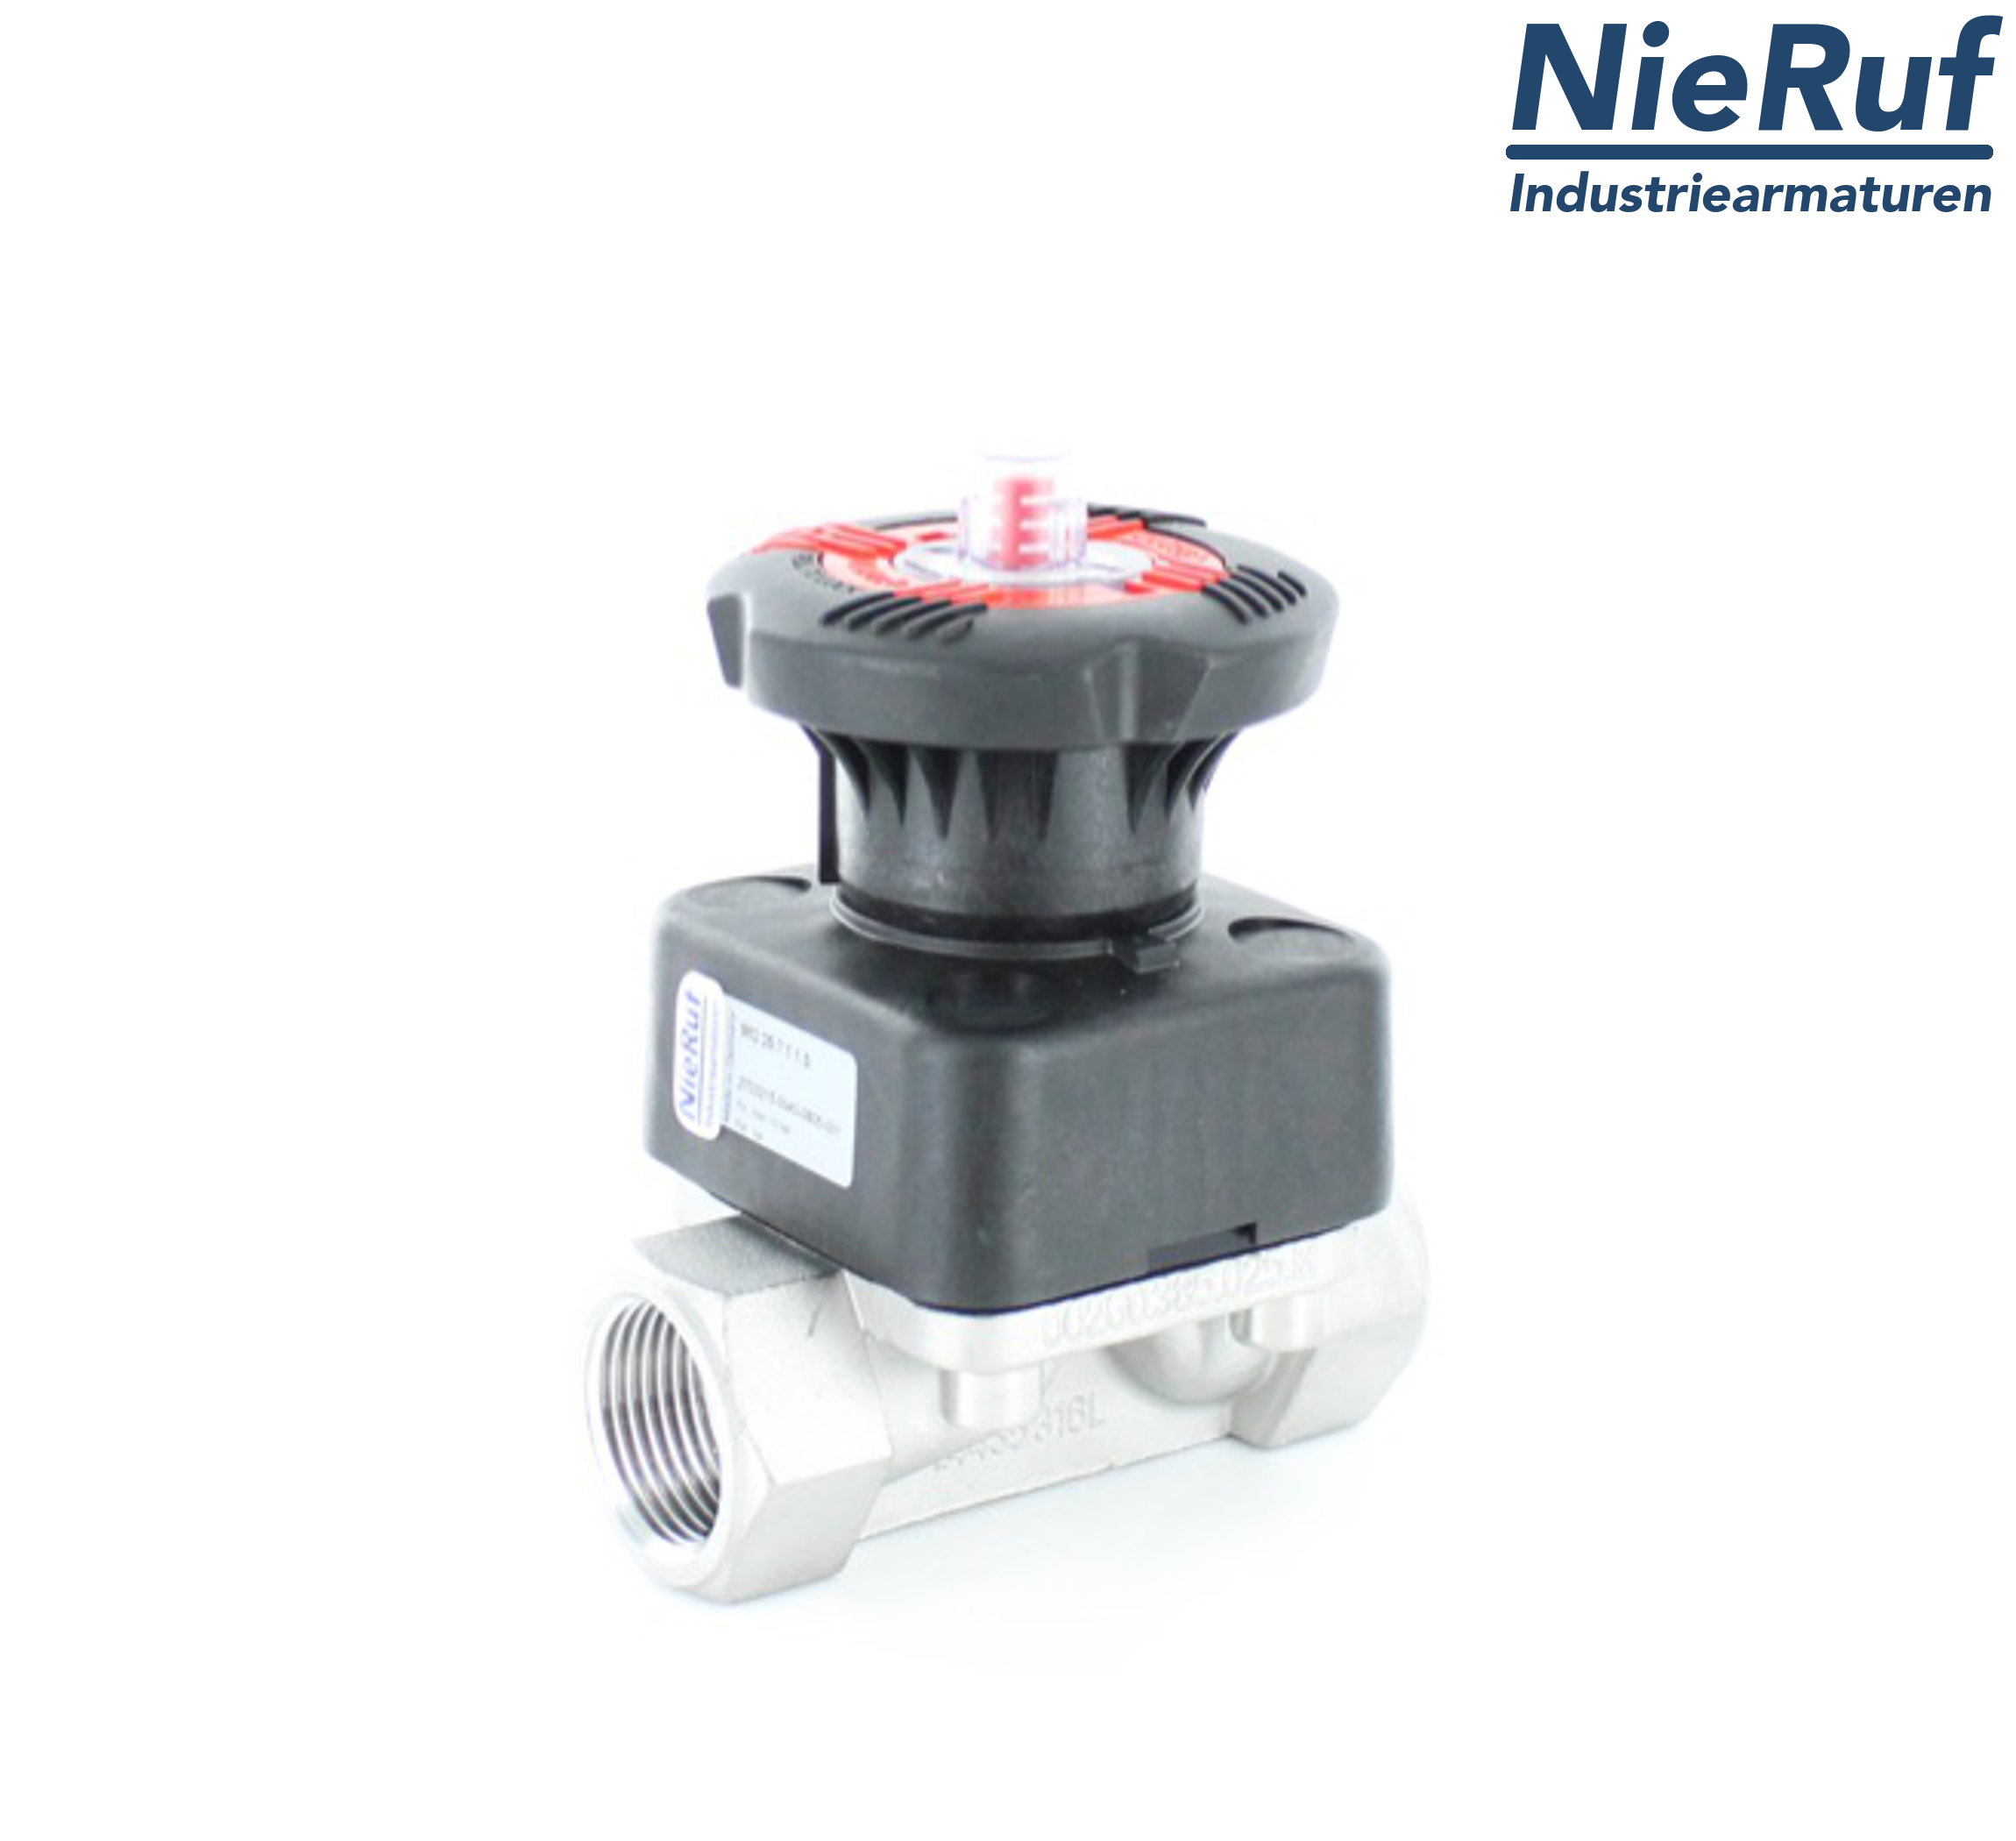 stainless steel-diaphragm valve 1/2 Inch membrane PTFE/EPDM two-piece female thread BSP